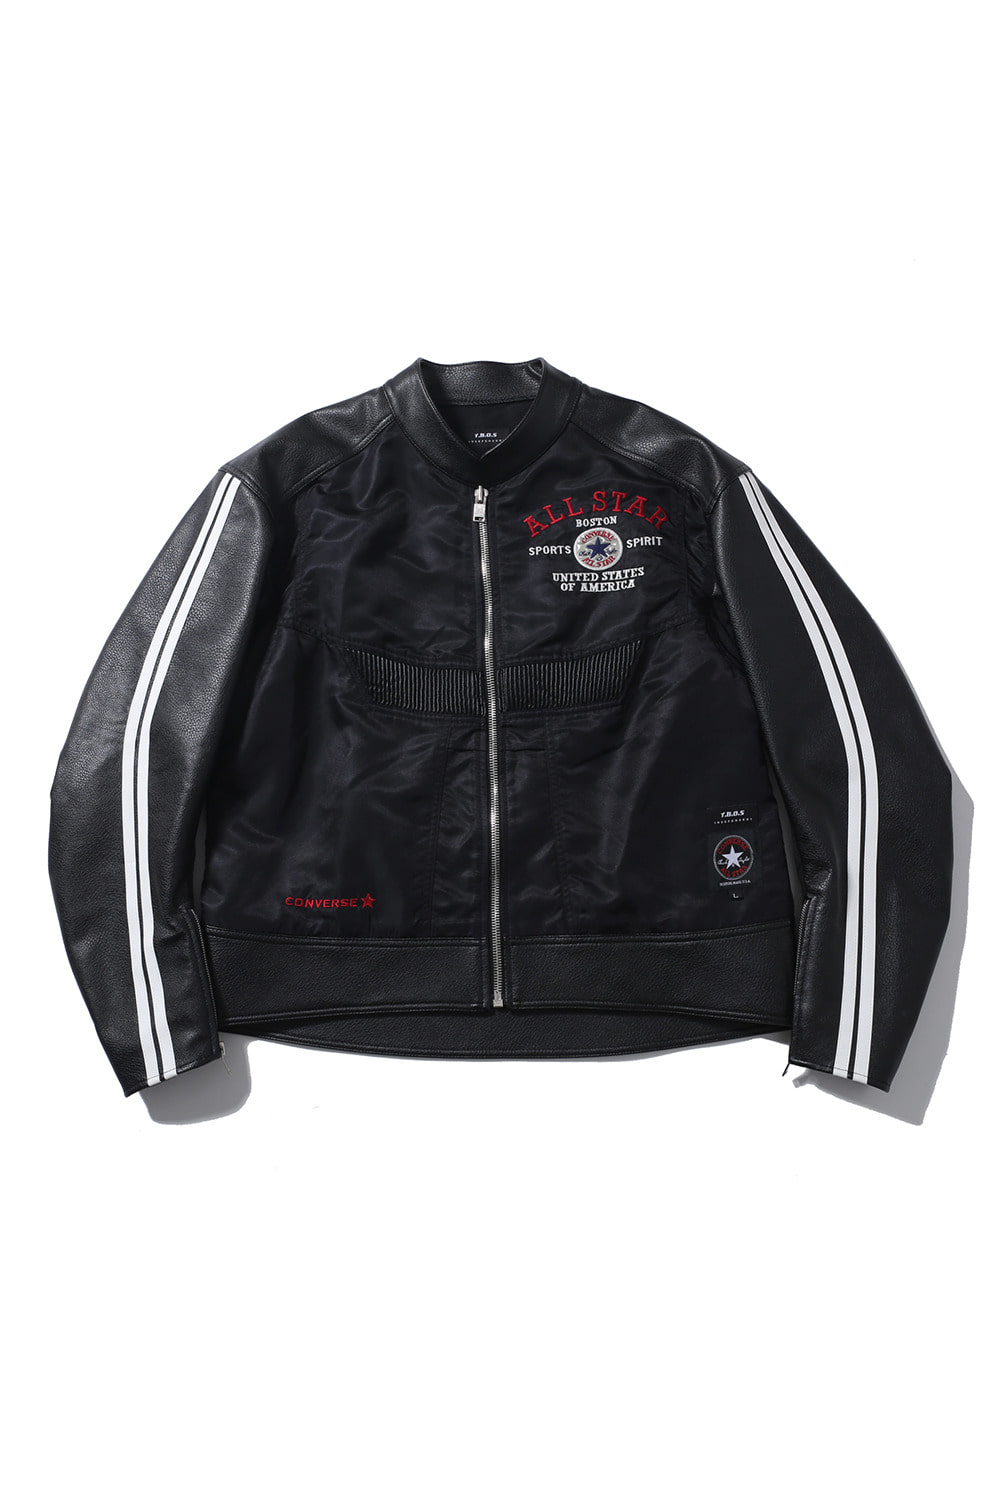 T.B.O.S x CONVERSE Restructured Racing Jacket 001